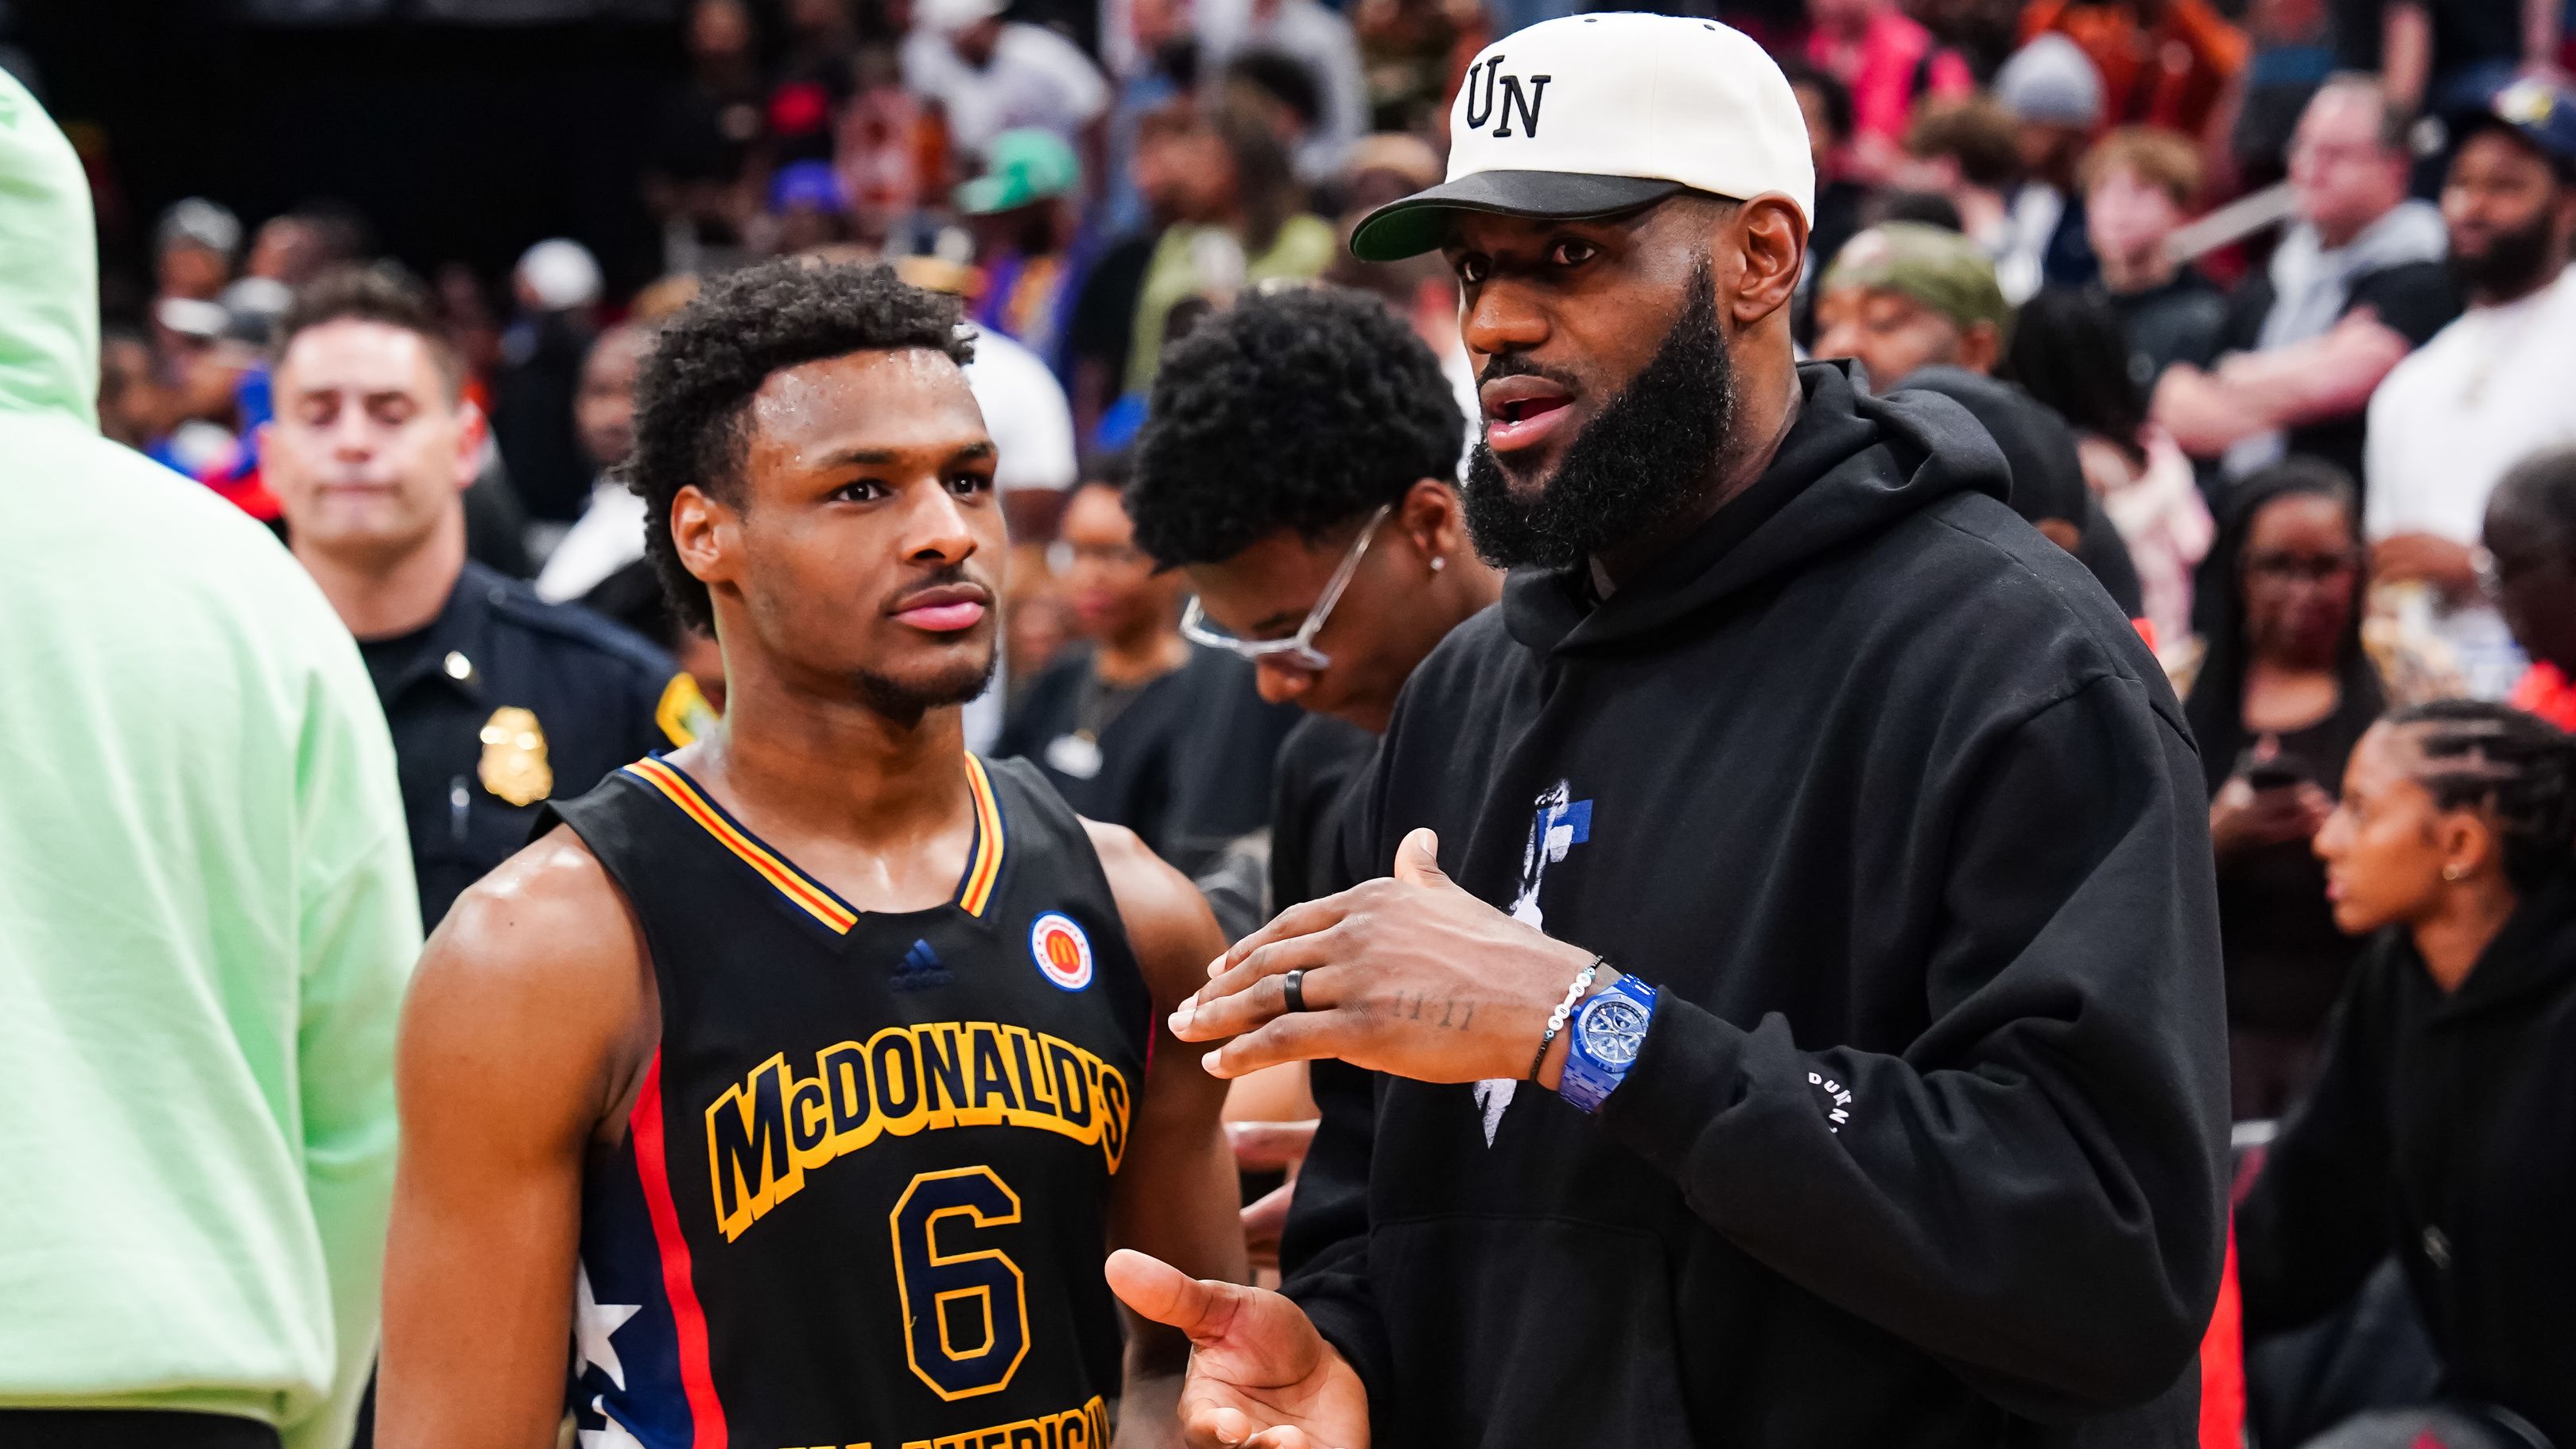 HOUSTON, TEXAS - MARCH 28: Bronny James #6 of the West team talks to Lebron James of the Los Angeles Lakers after the 2023 McDonald&#x27;s High School Boys All-American Game at Toyota Center on March 28, 2023 in Houston, Texas. (Photo by Alex Bierens de Haan/Getty Images)